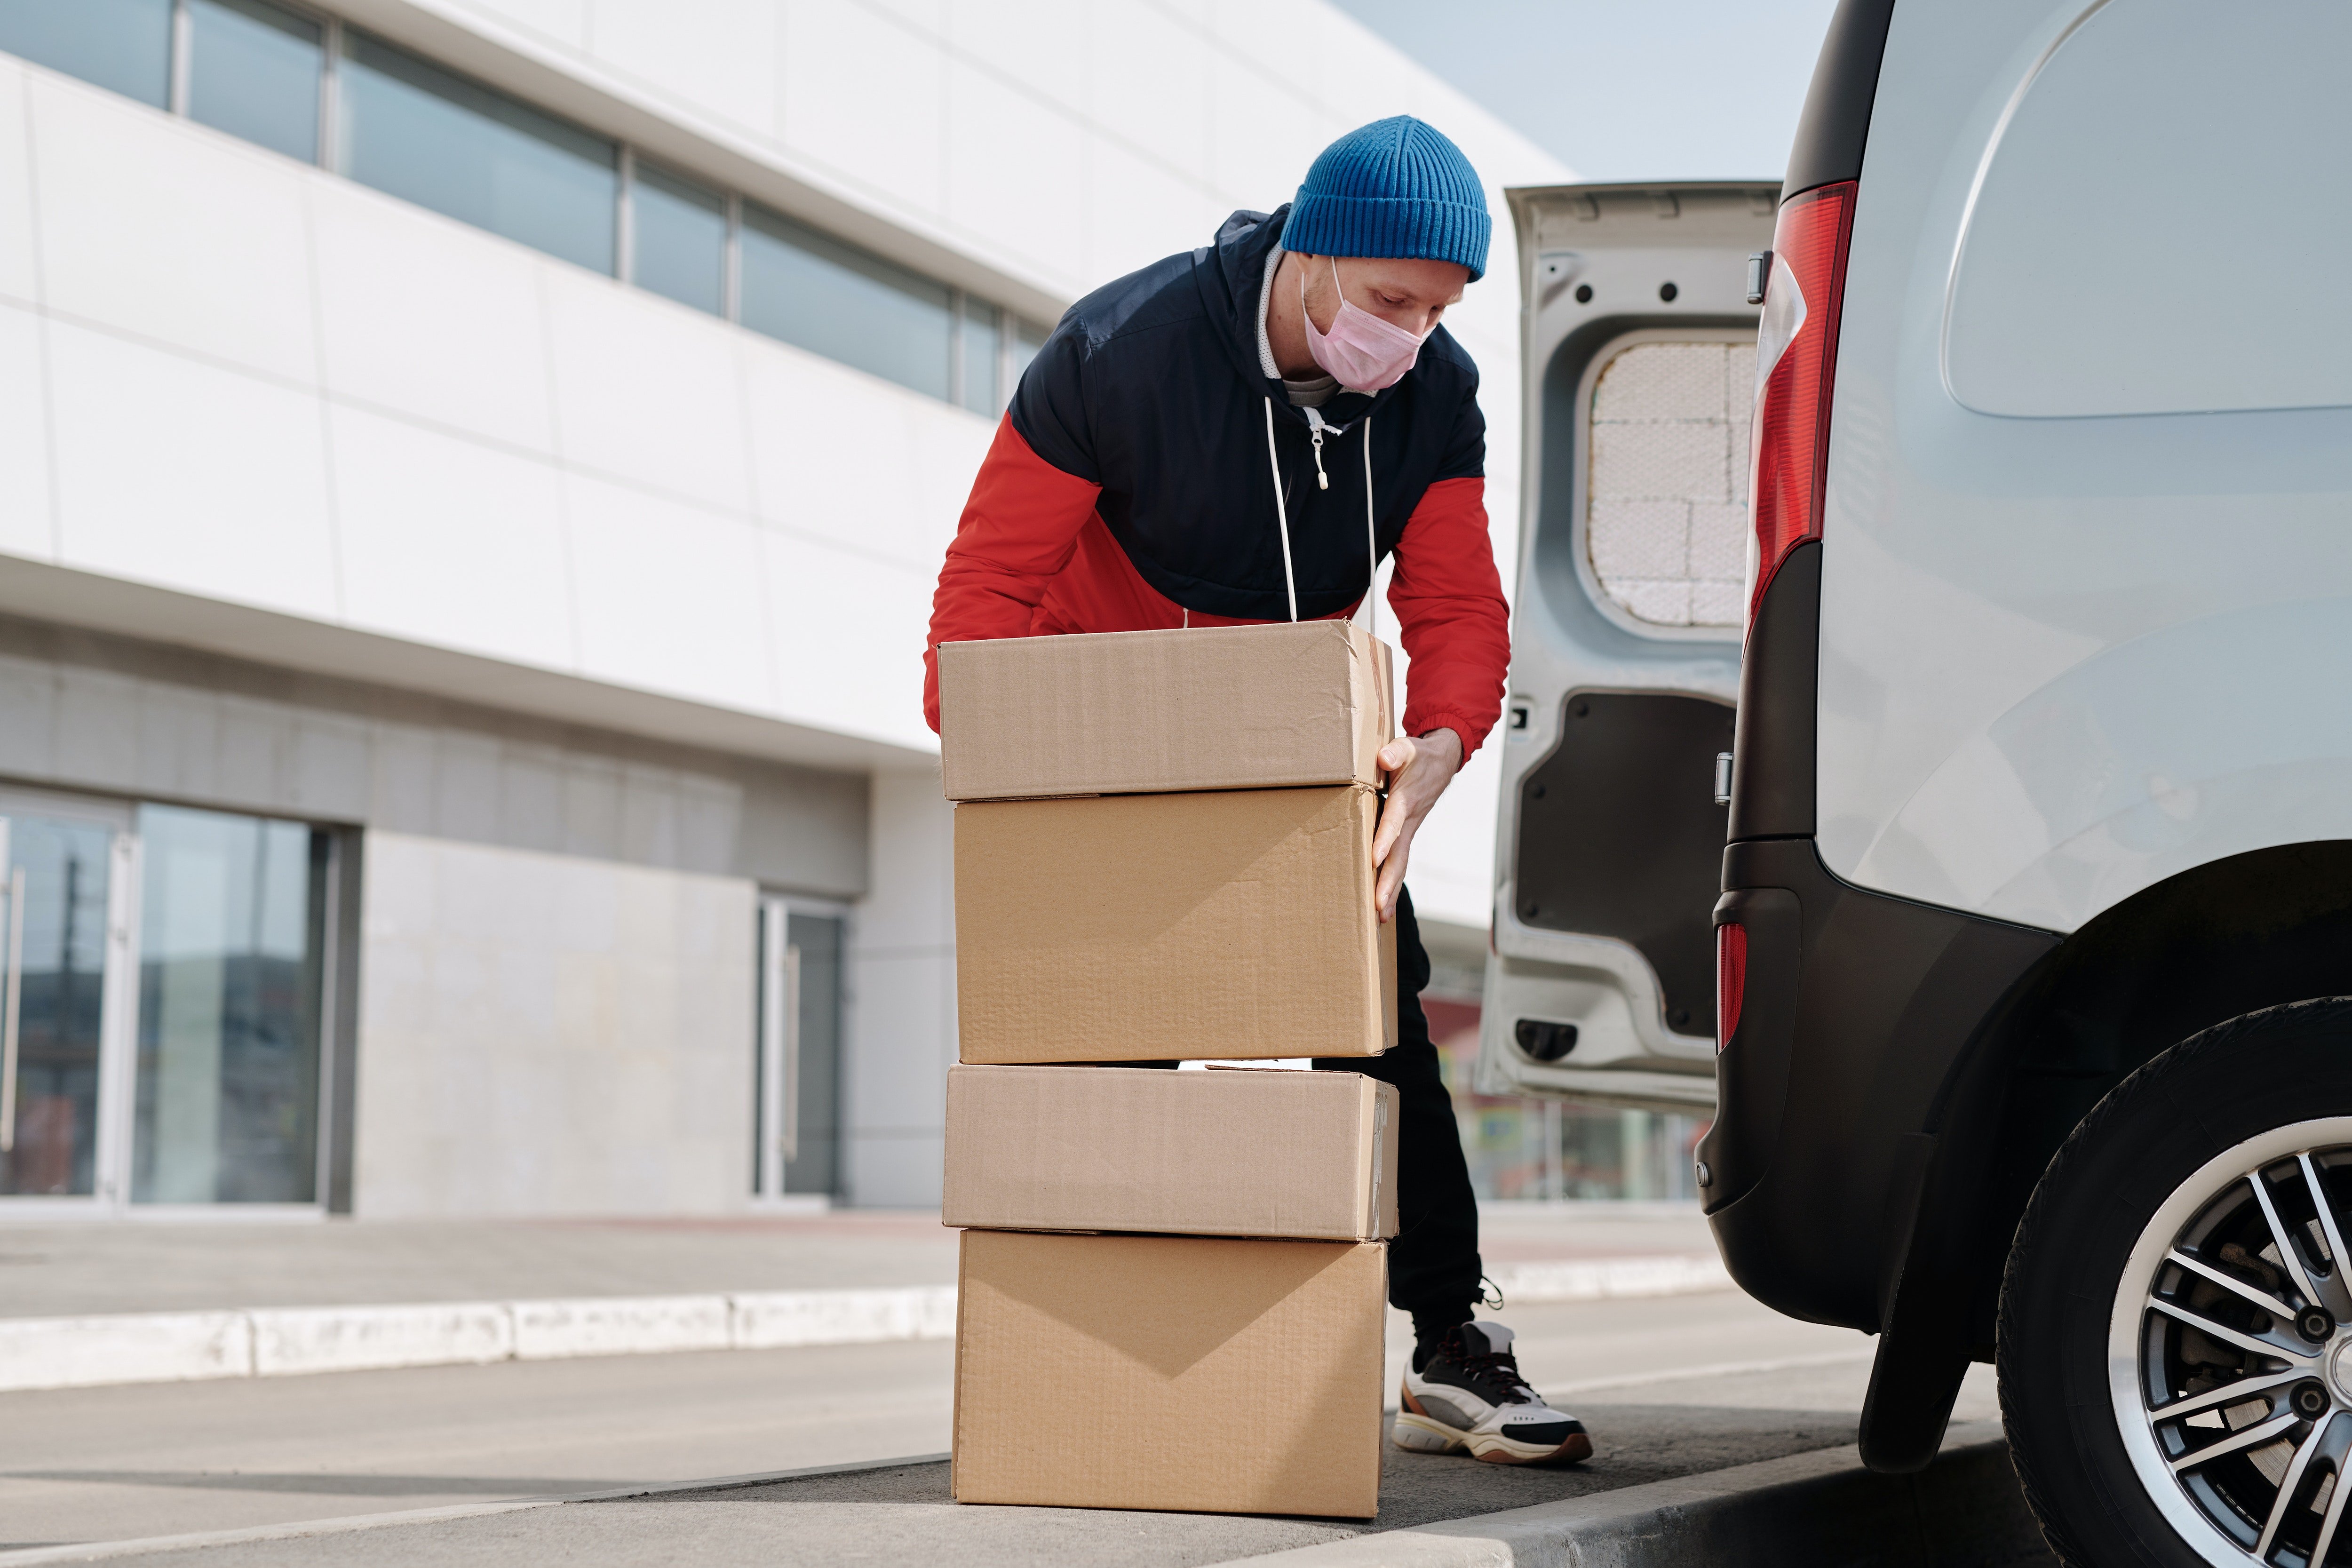 The same delivery guy would deliver the packages for Emma every day. | Source: Pexels